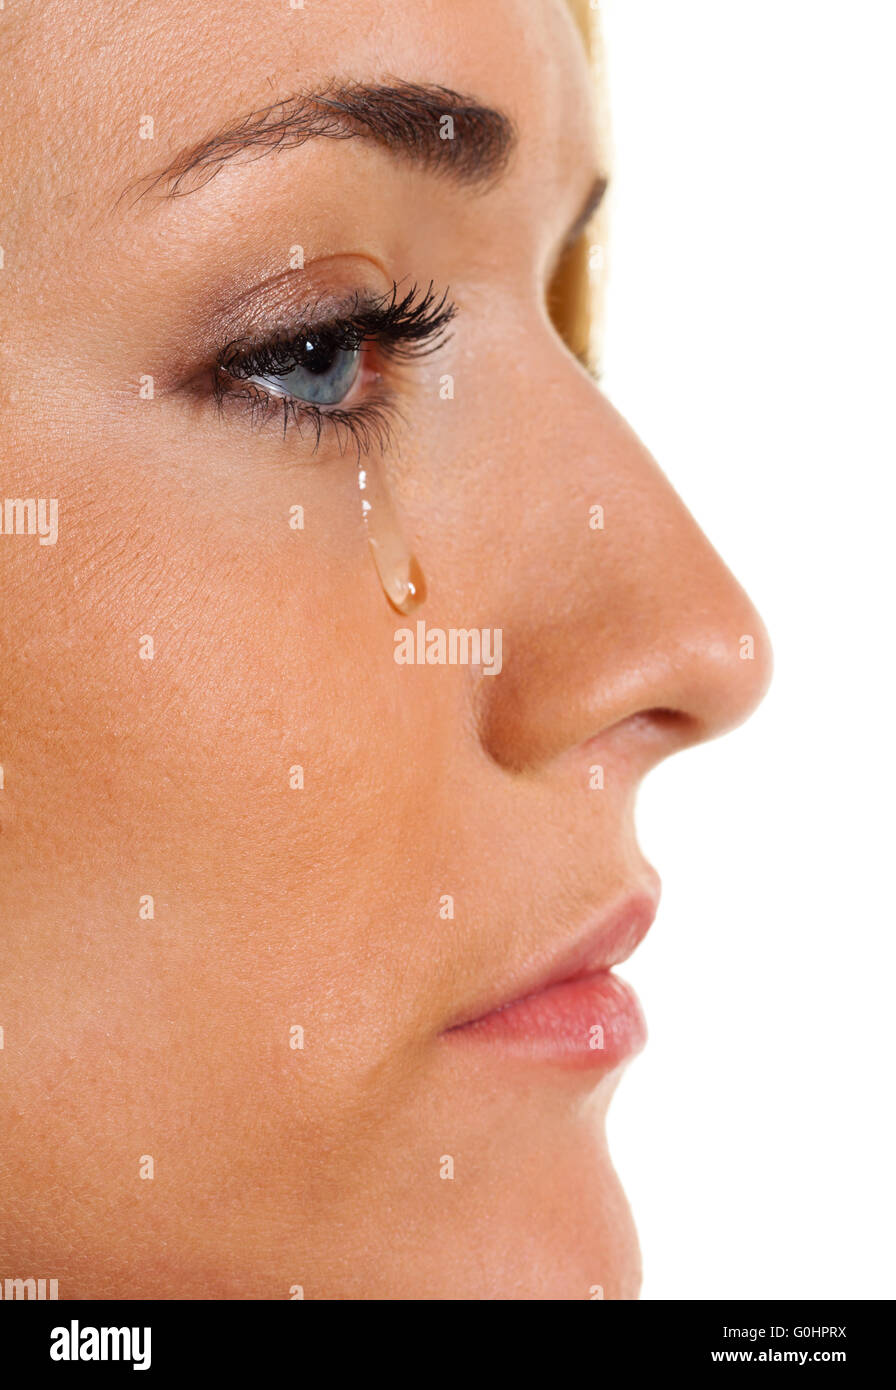 Sad woman weeps tears. Photo icon fear and violence Stock Photo